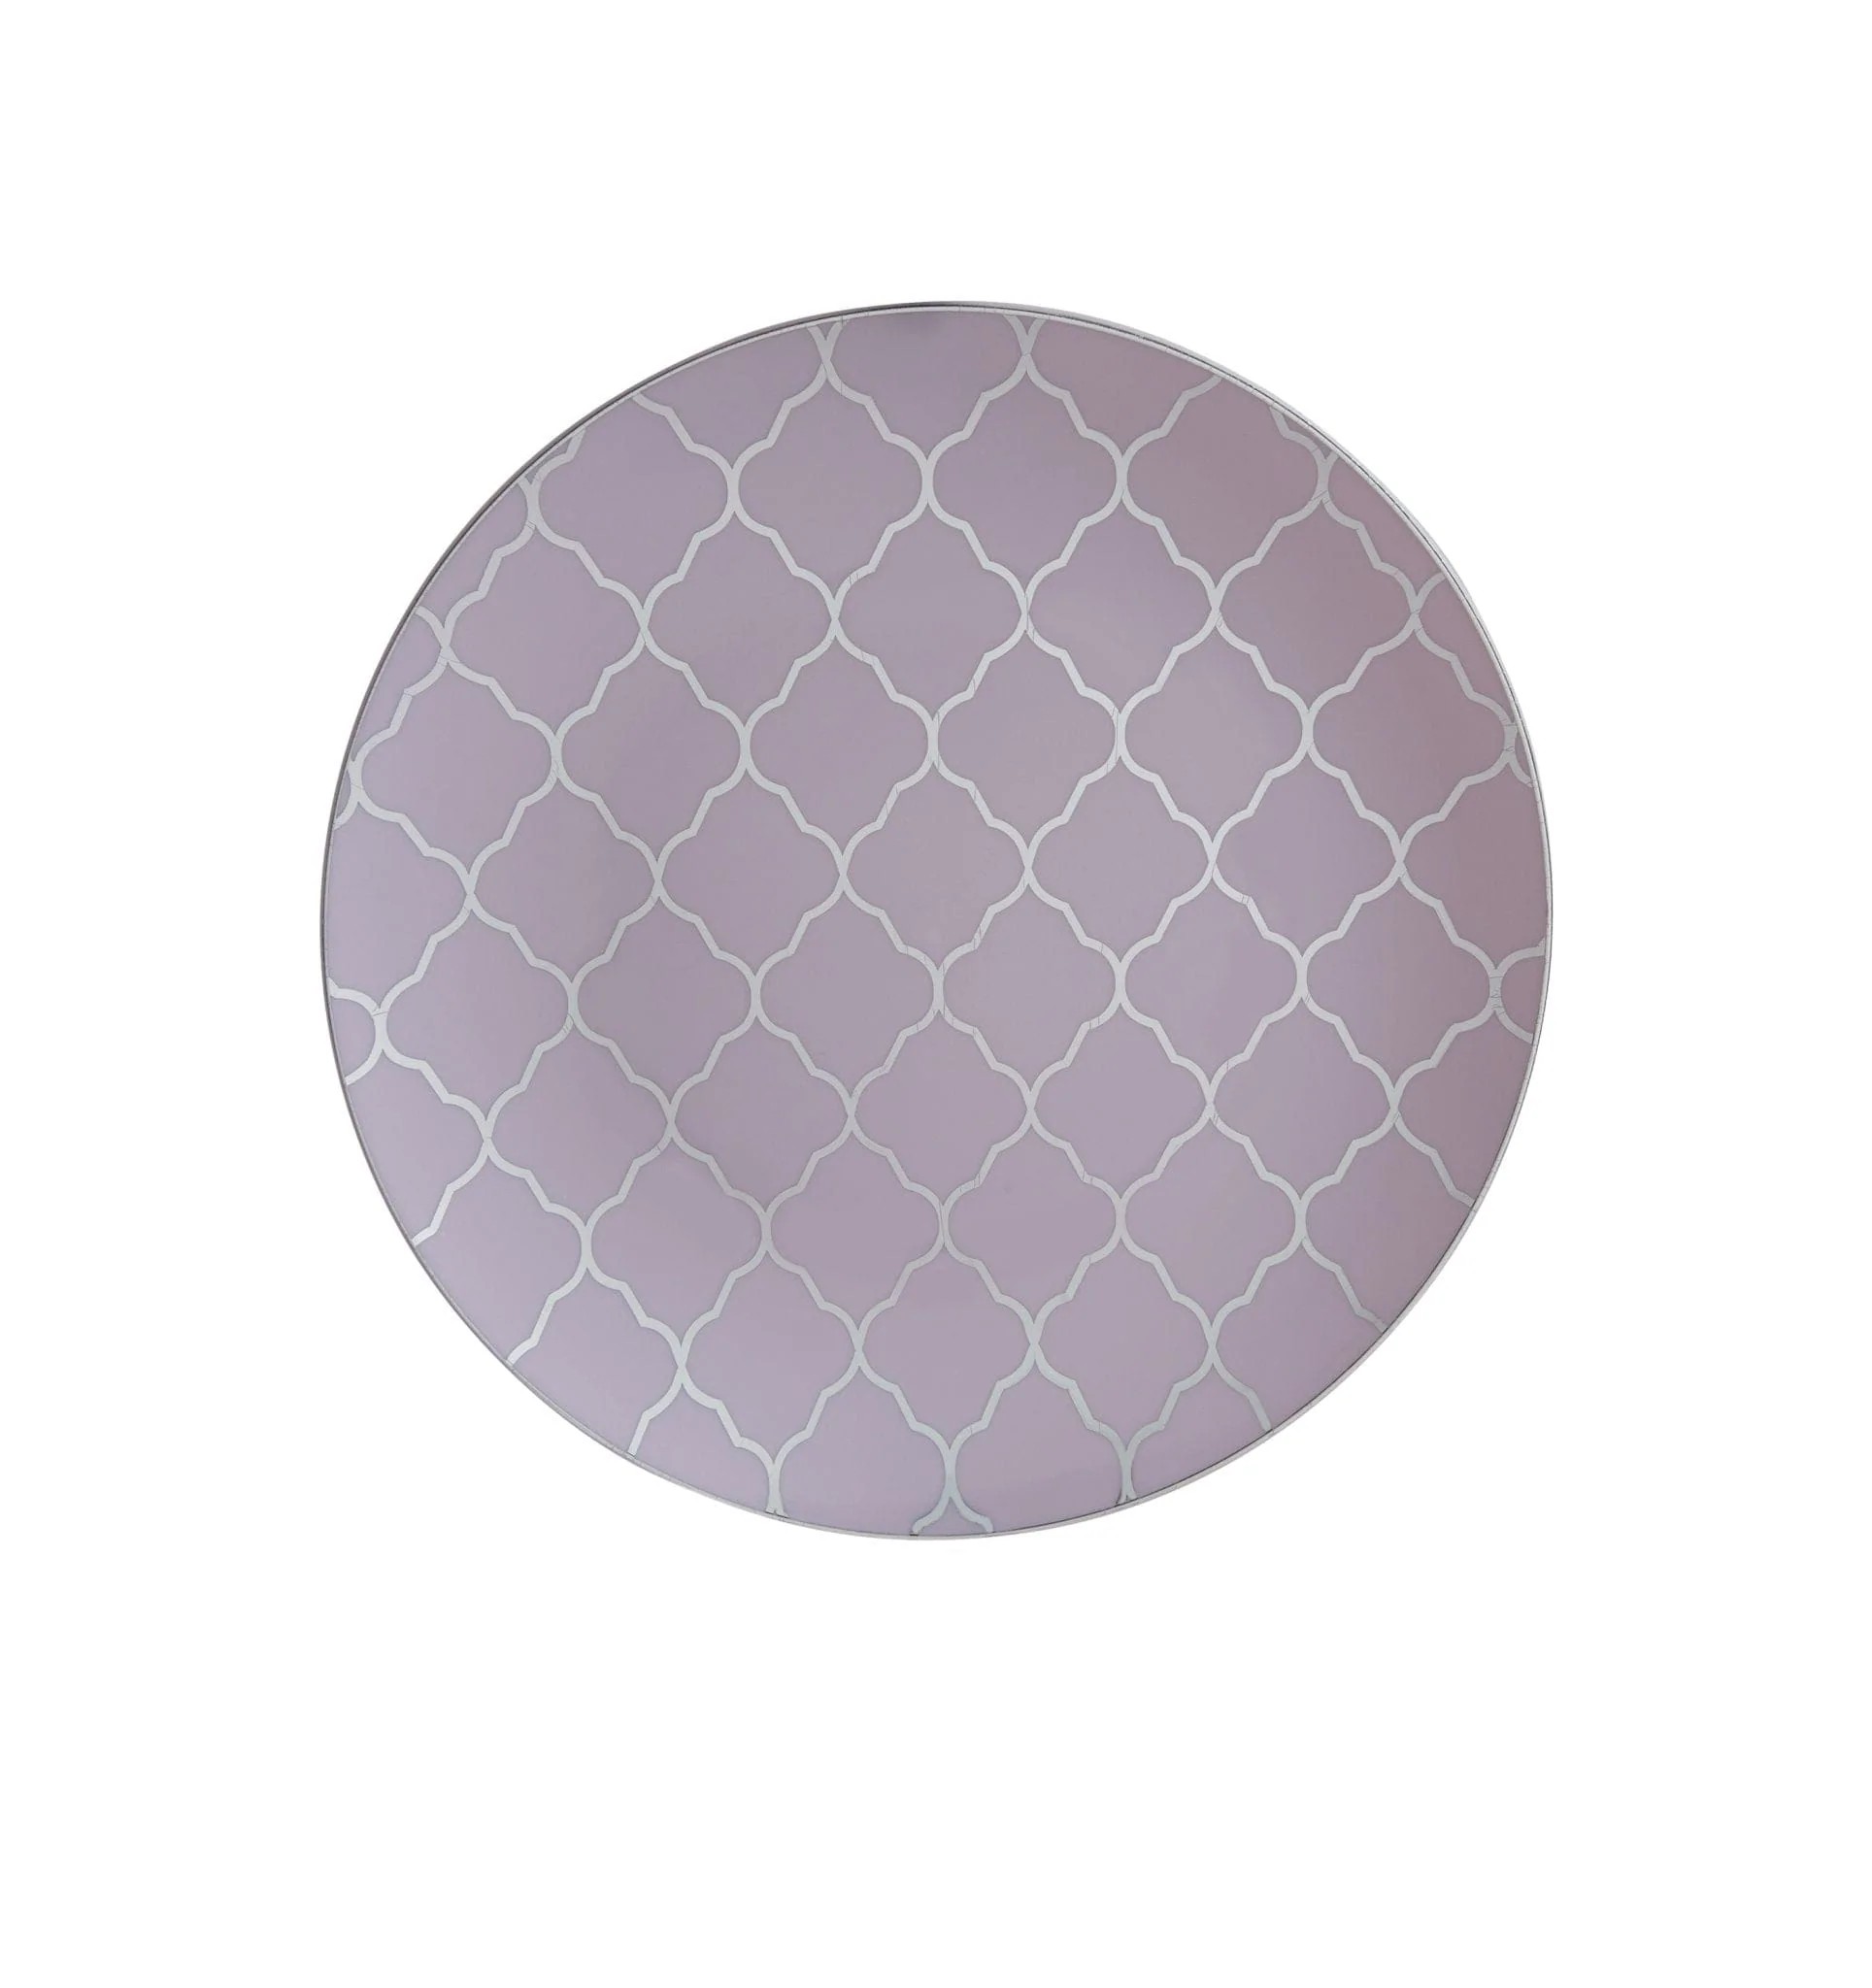 Luxe Party Lavender with Silver Lattice Pattern Plastic Dinner Plate 10.25